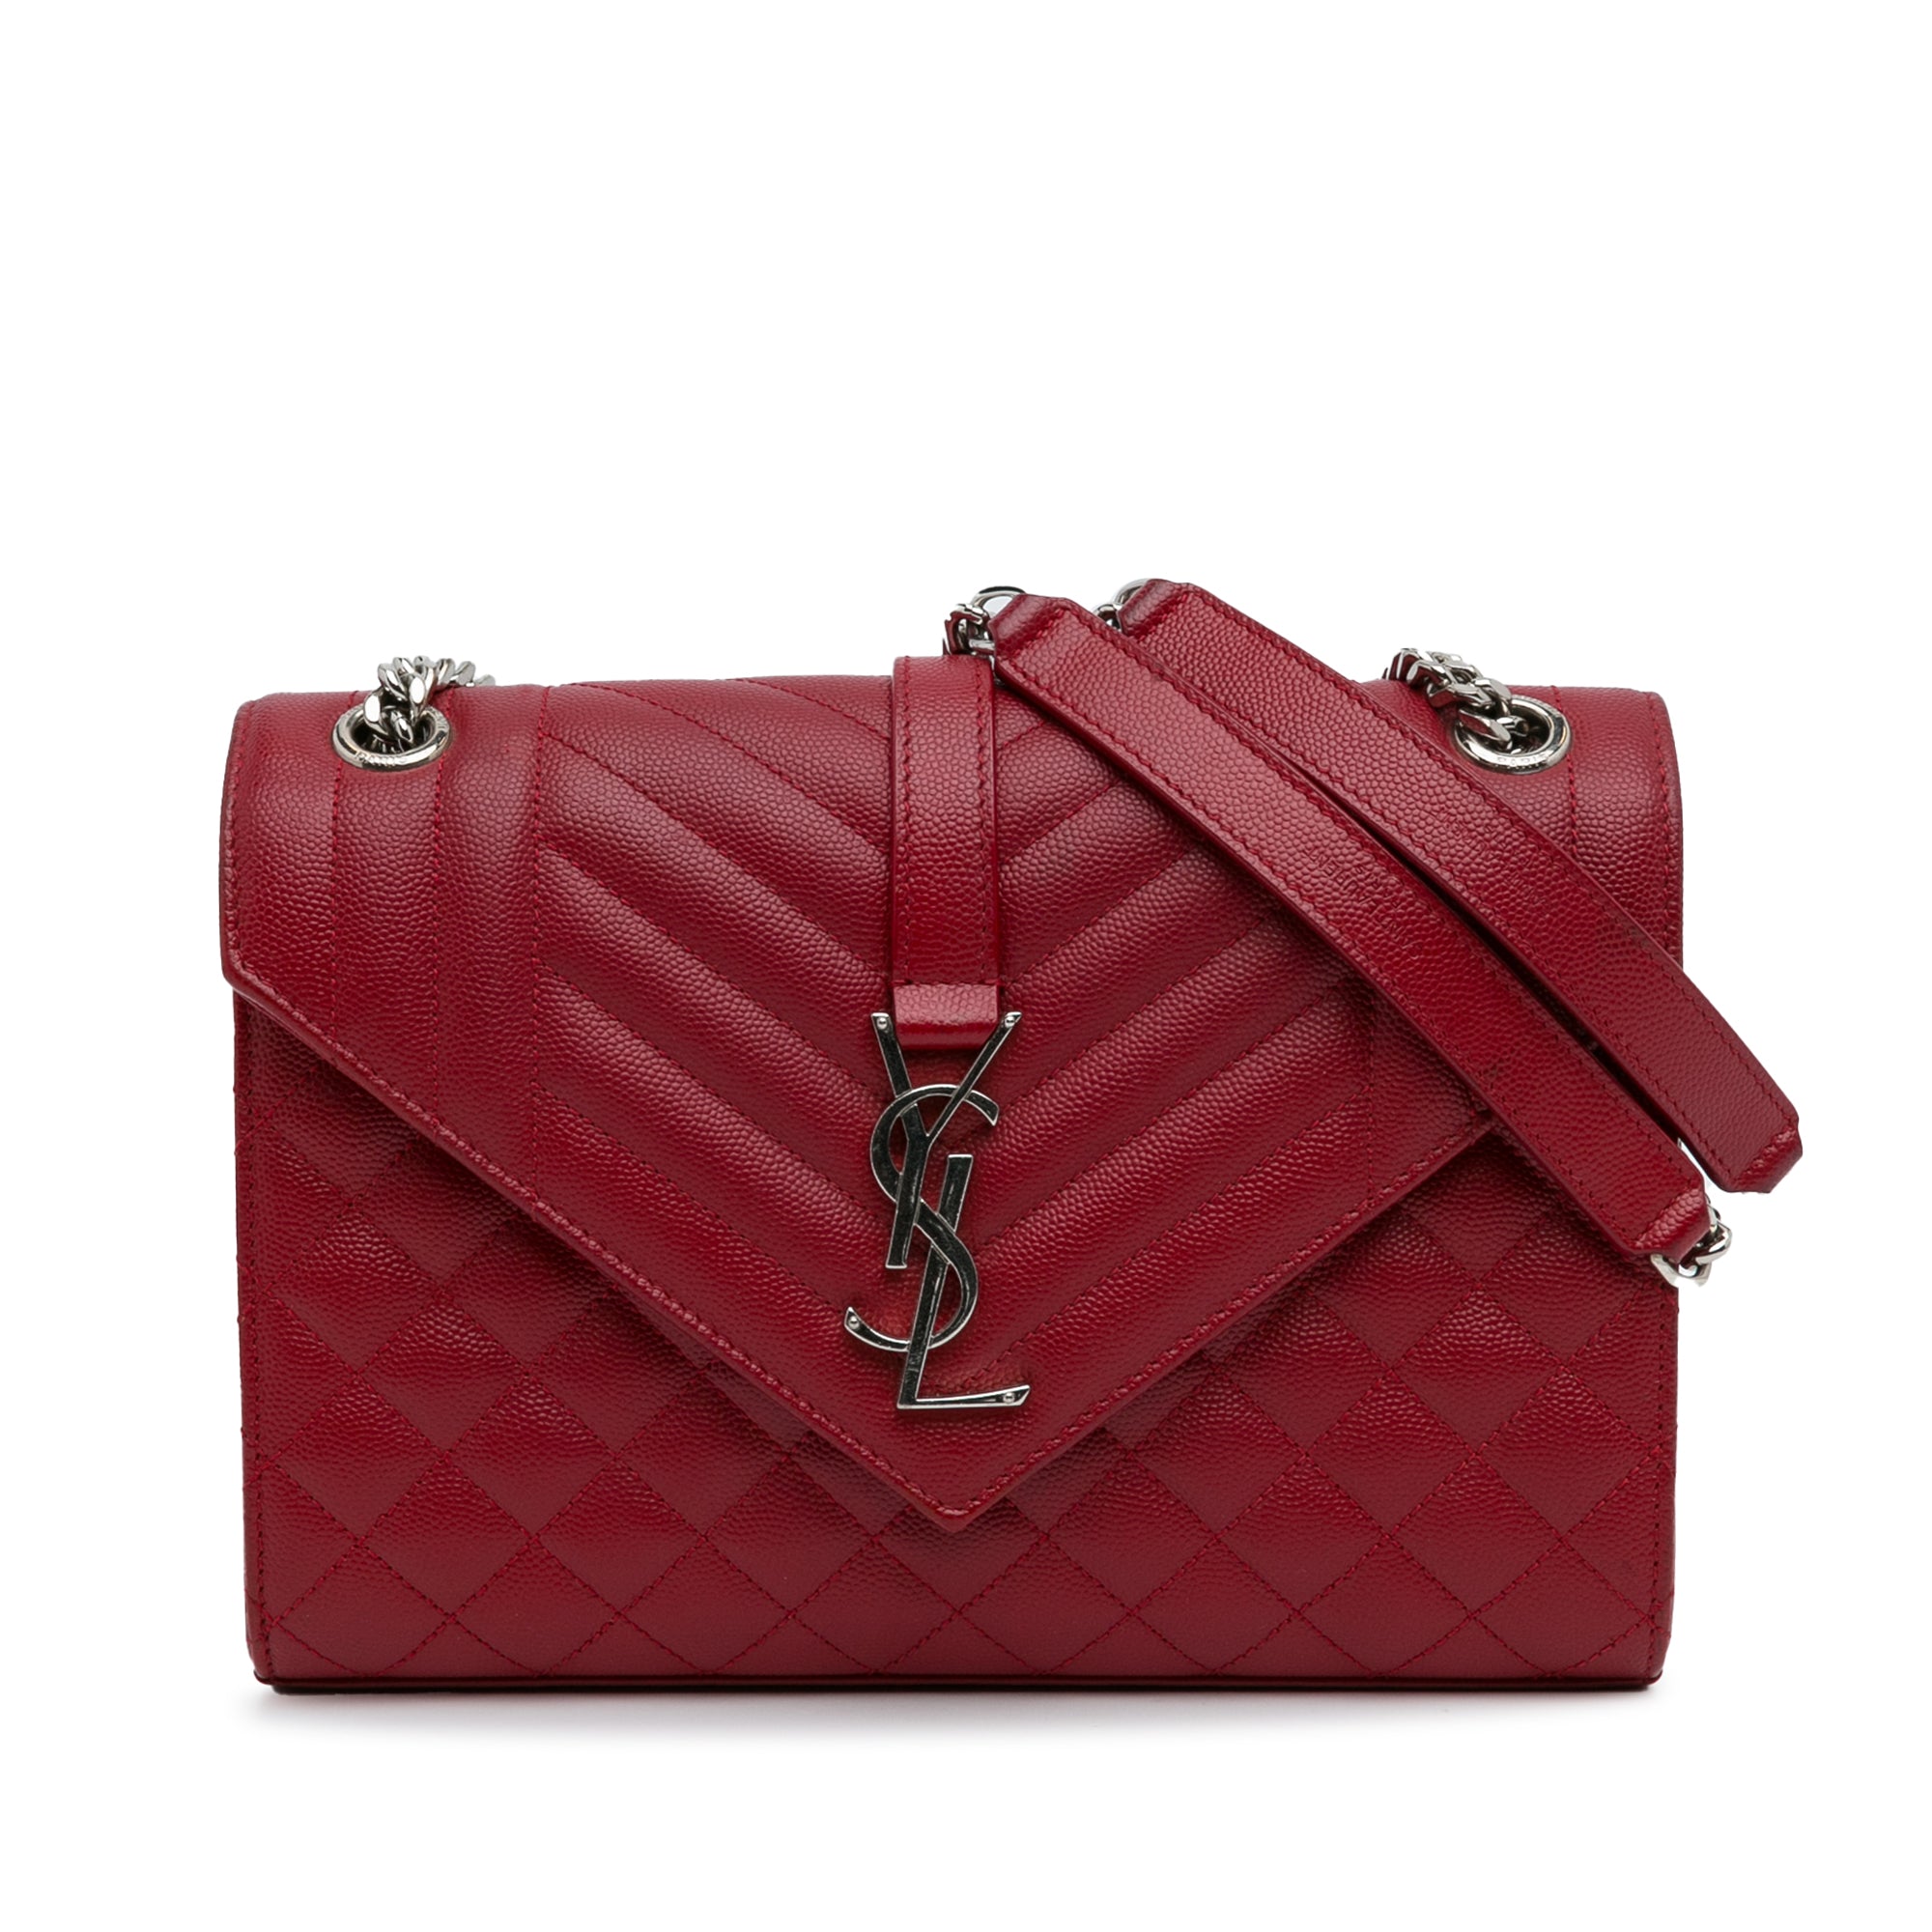 YSL College bag Large - Red 